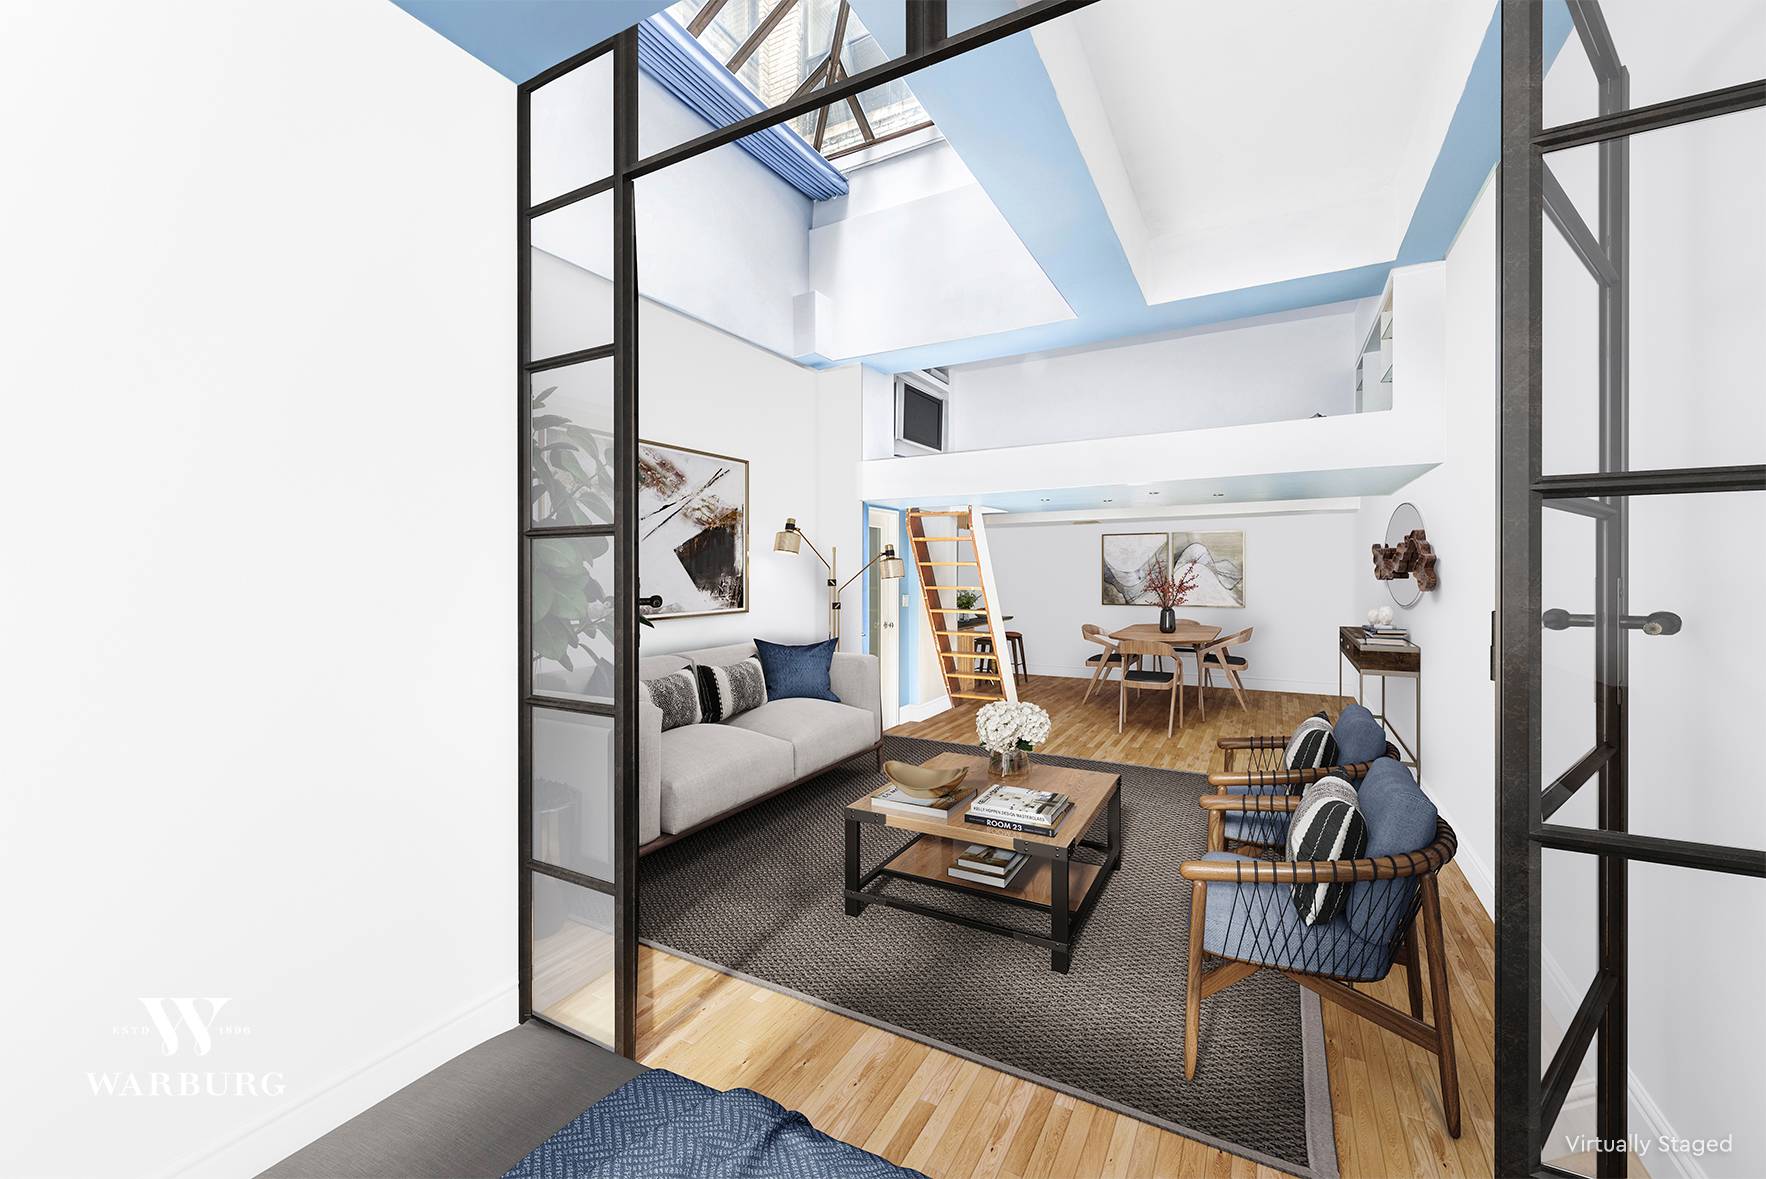 Live work opportunity. Truly unique and flexible loft studio apartment at the historic and landmarked Sage House Cooperative located just steps from Gramercy Park.